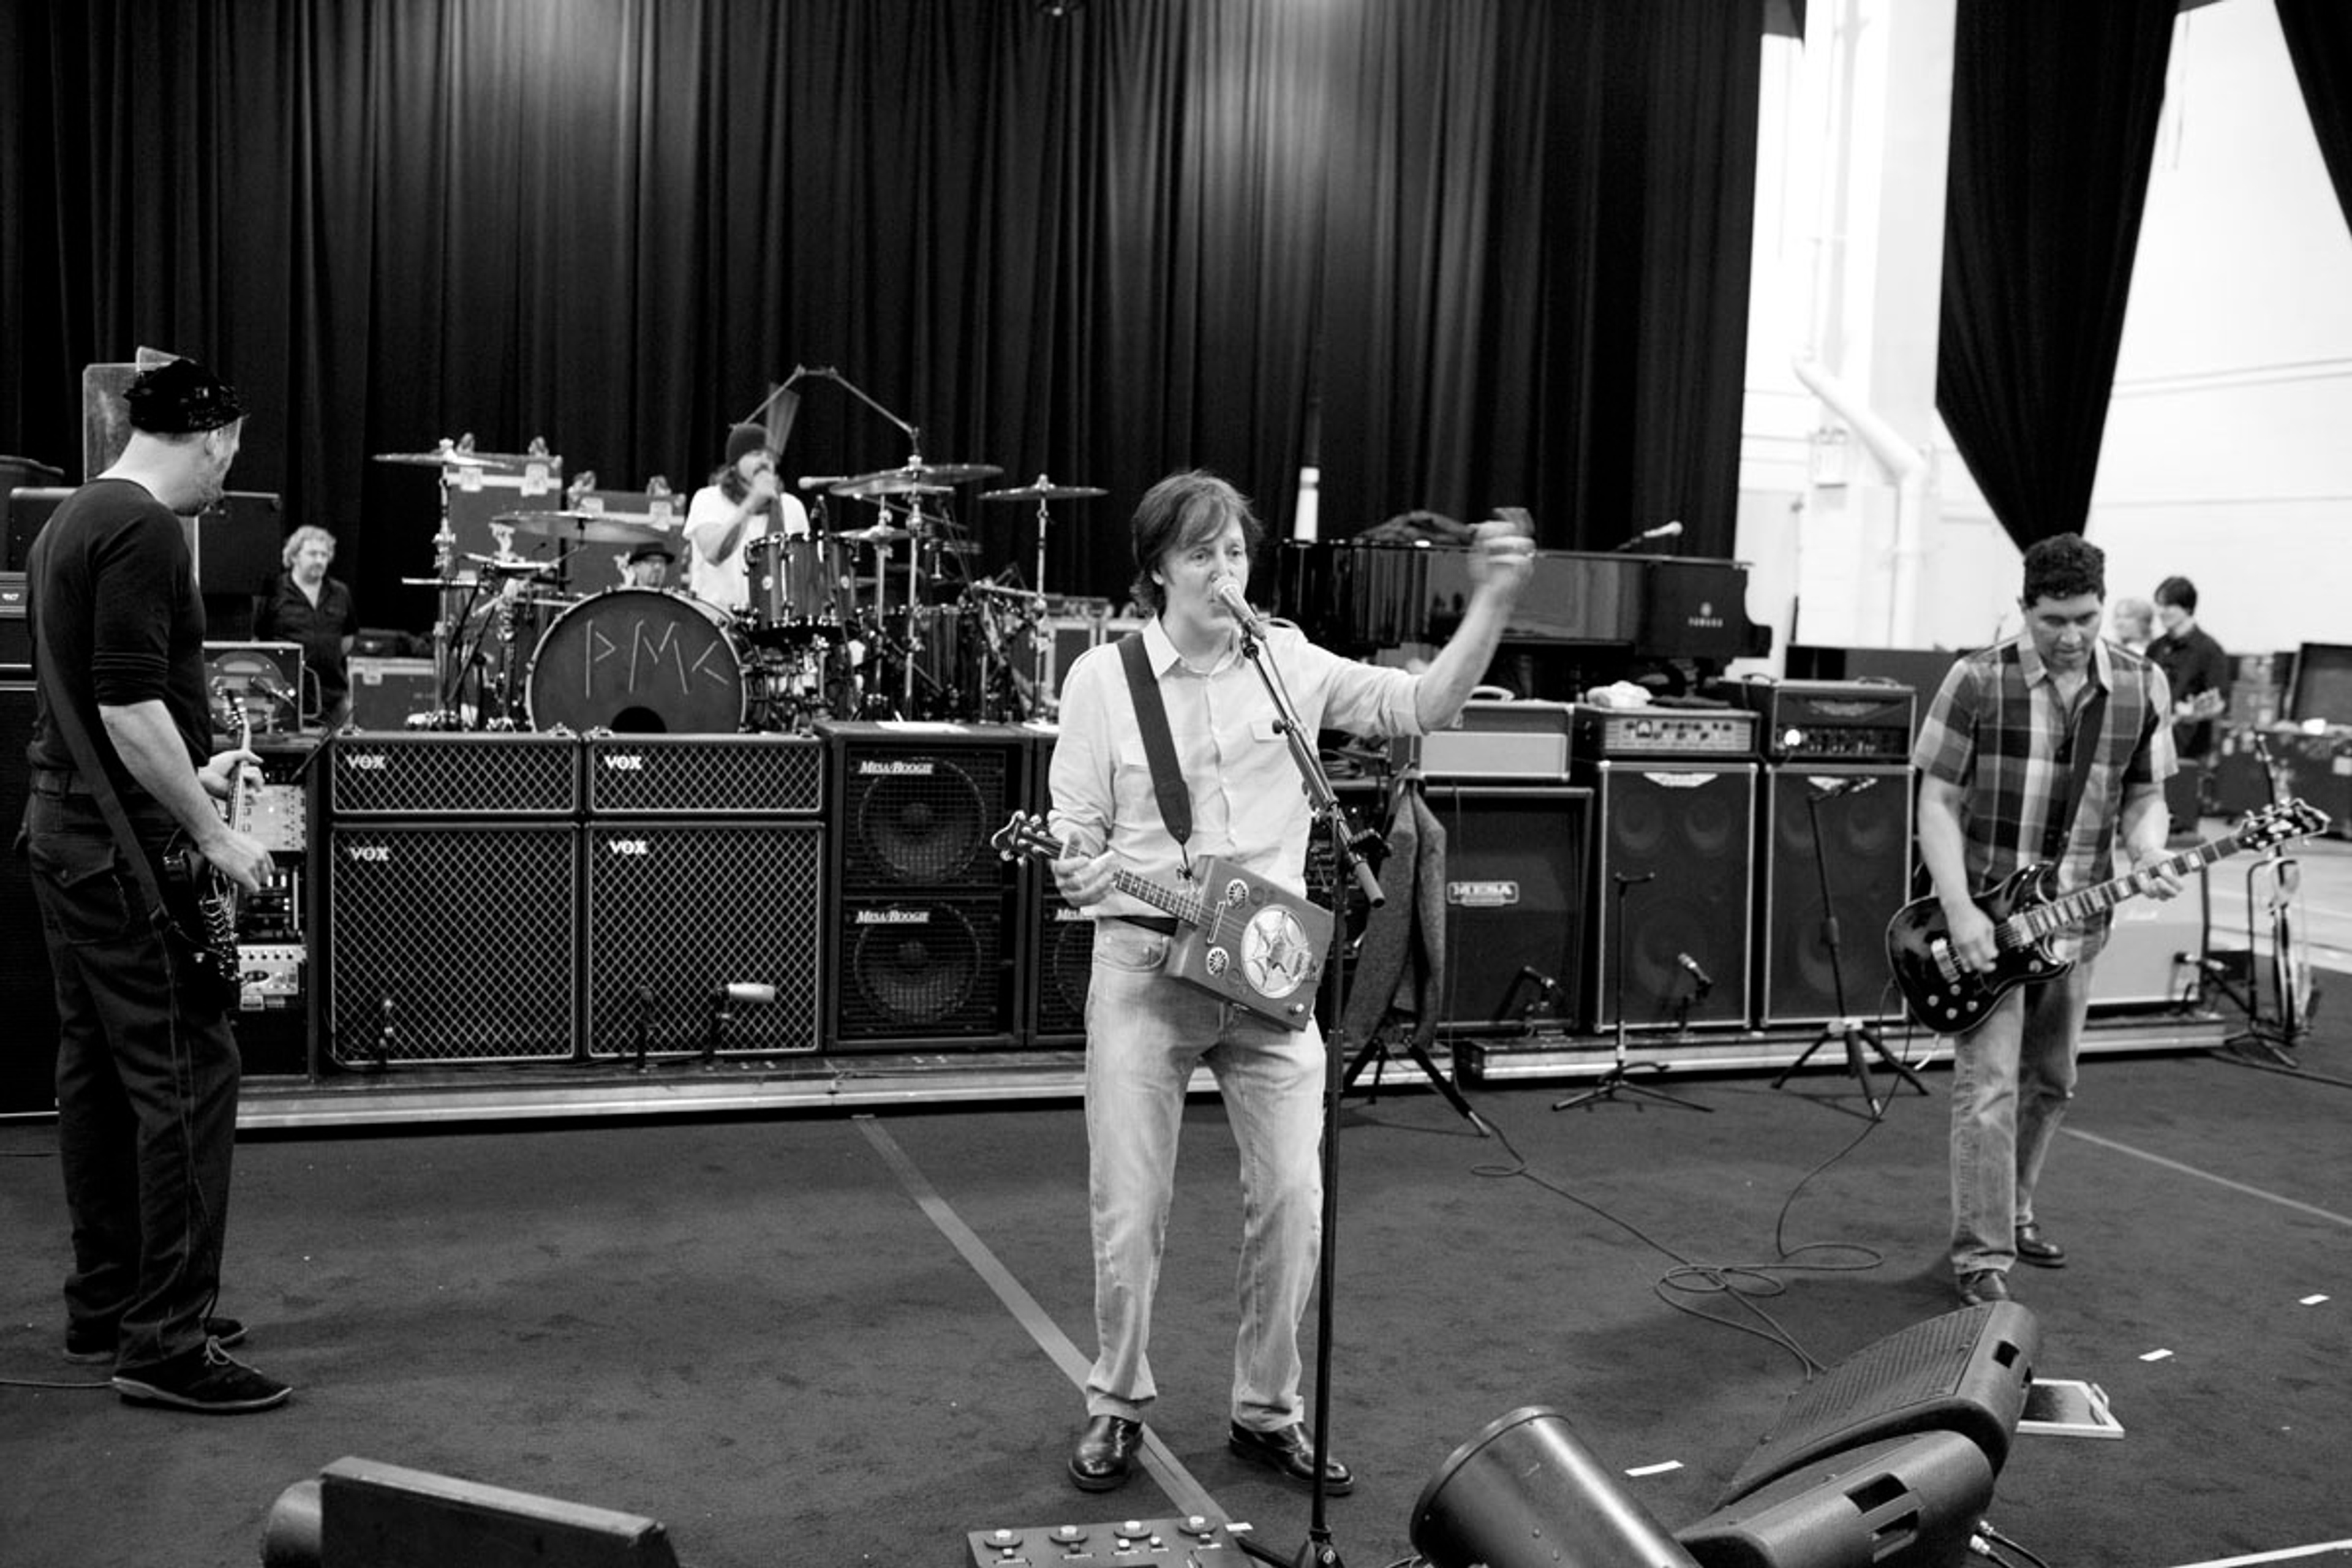 Paul rehearsing with (from l-r) Krist Novoselic, Dave Grohl and Pat Smear, 12-12-12 Hurricane Sandy Benefit, Madison Square Garden, NYC, 10th December 2012